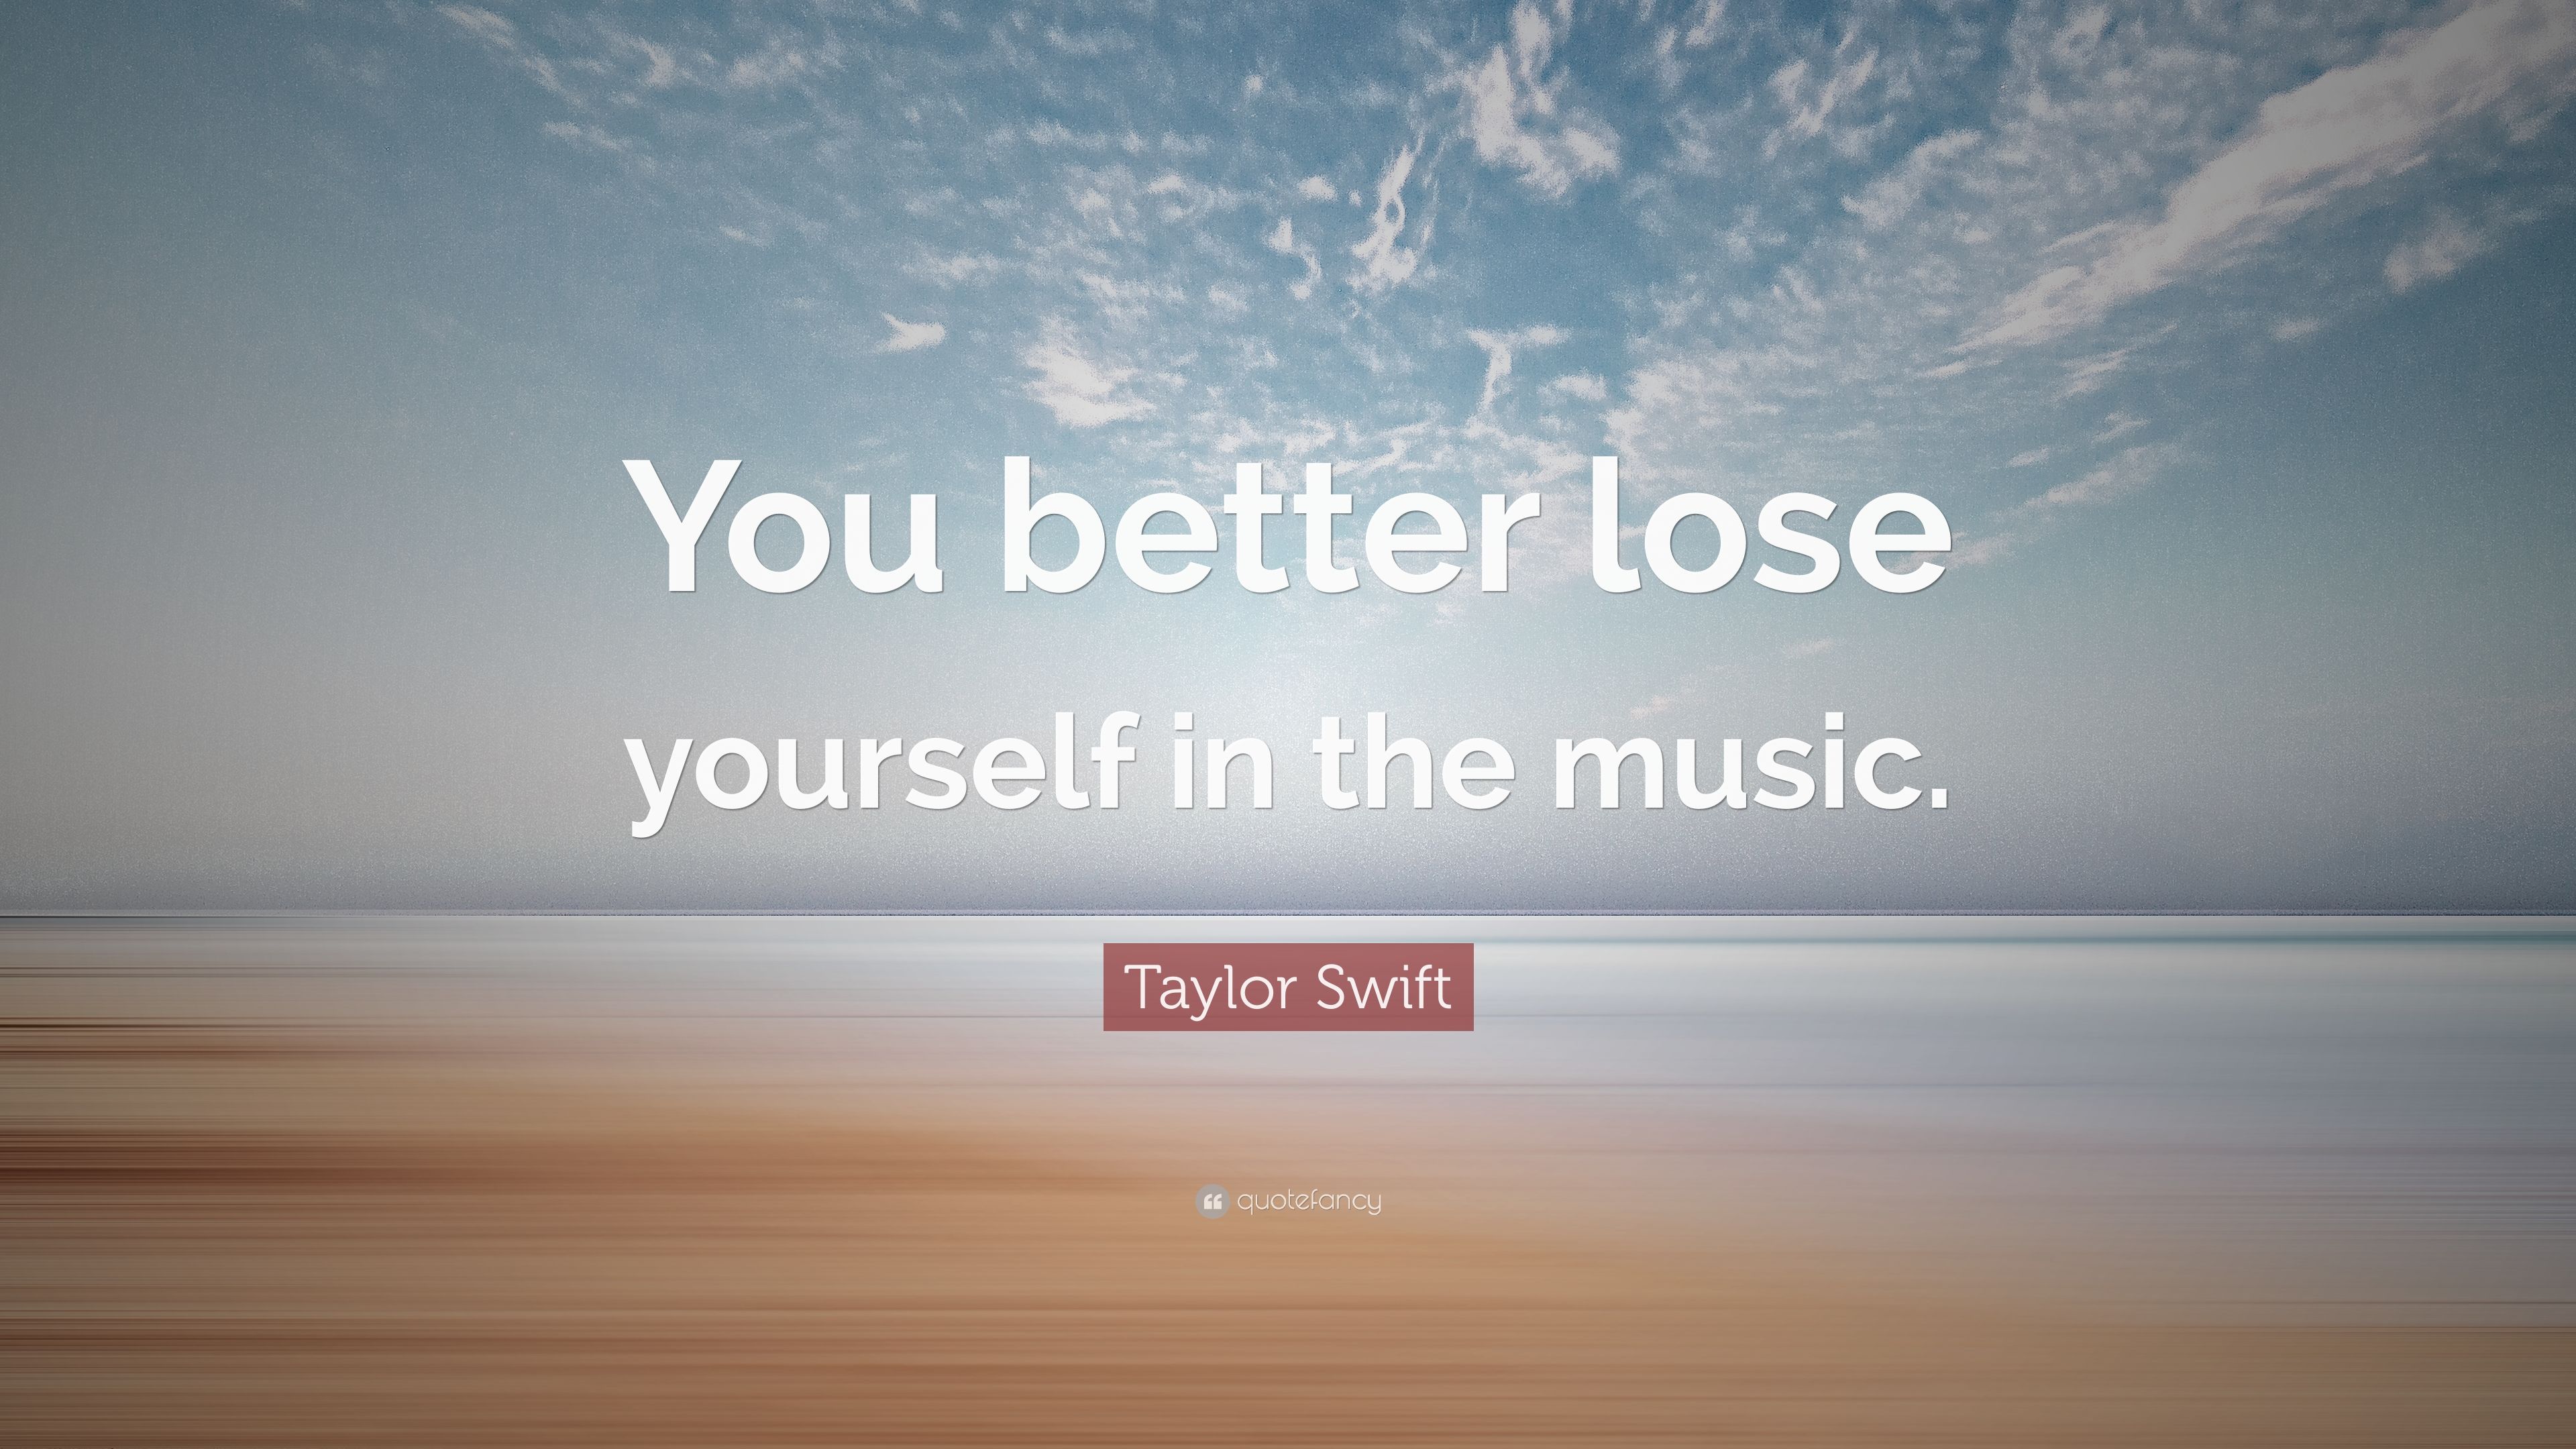 Taylor Swift Quote: “You better lose yourself in the music.” 7